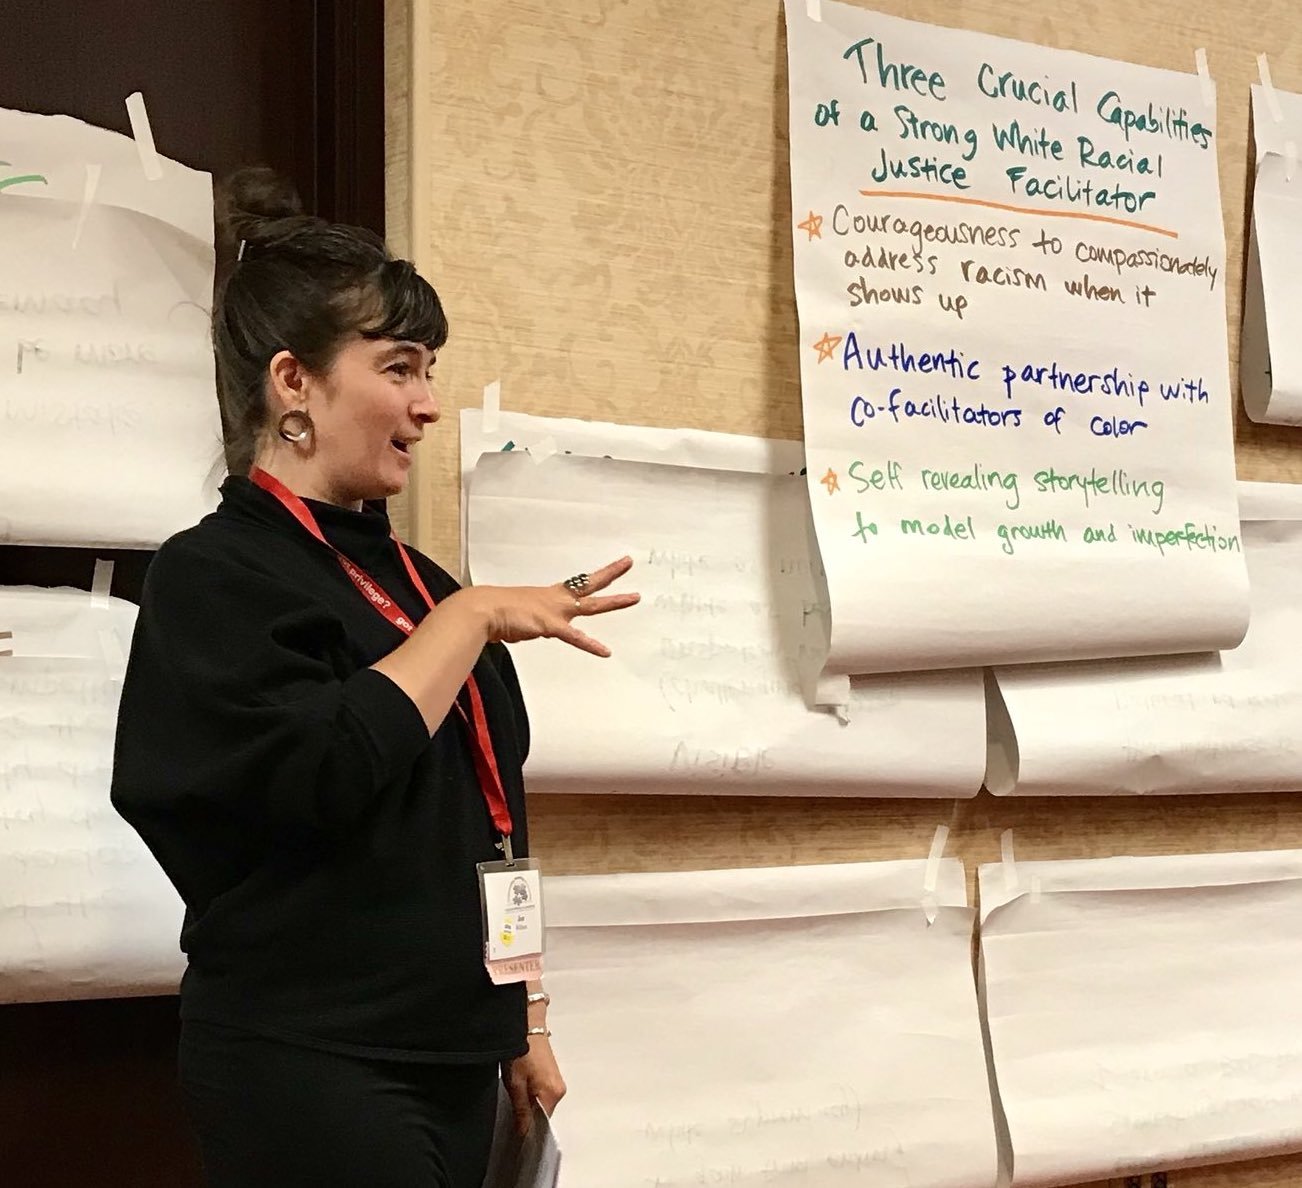 Leading a workshop at the White Privilege Conference in 2018